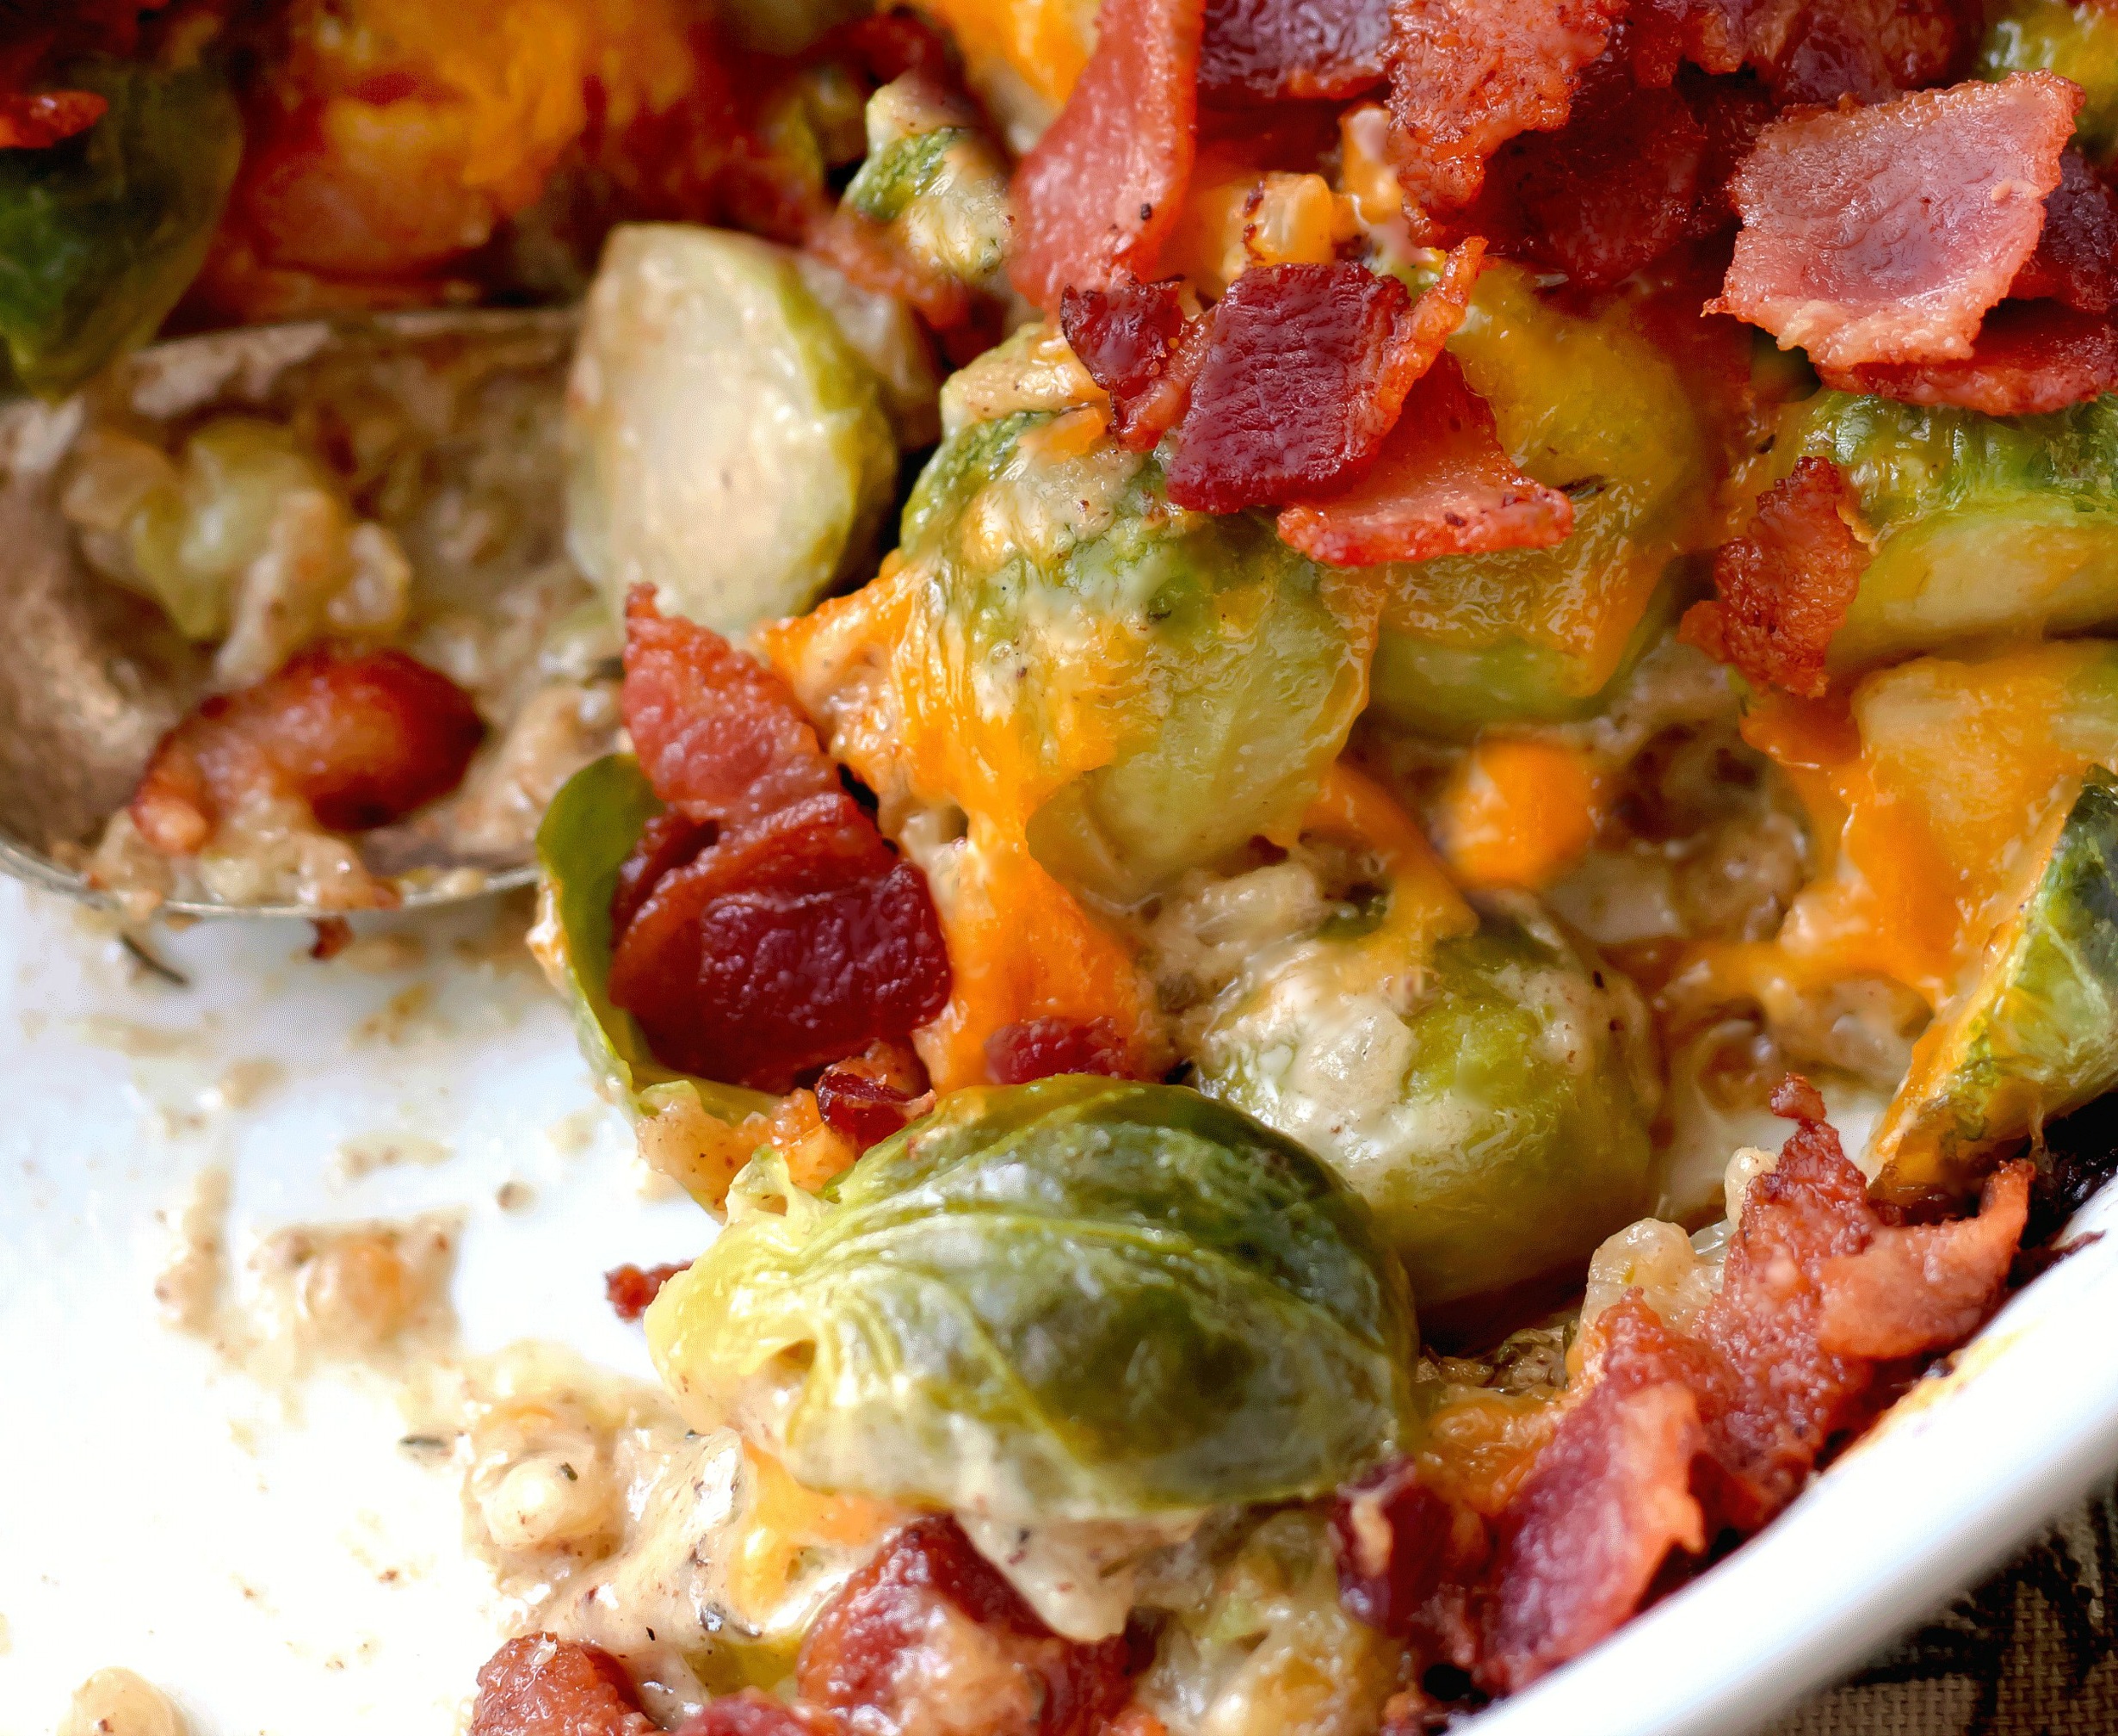 Brussels sprouts covered with cheese and bacon on a plate in a creamy sauce